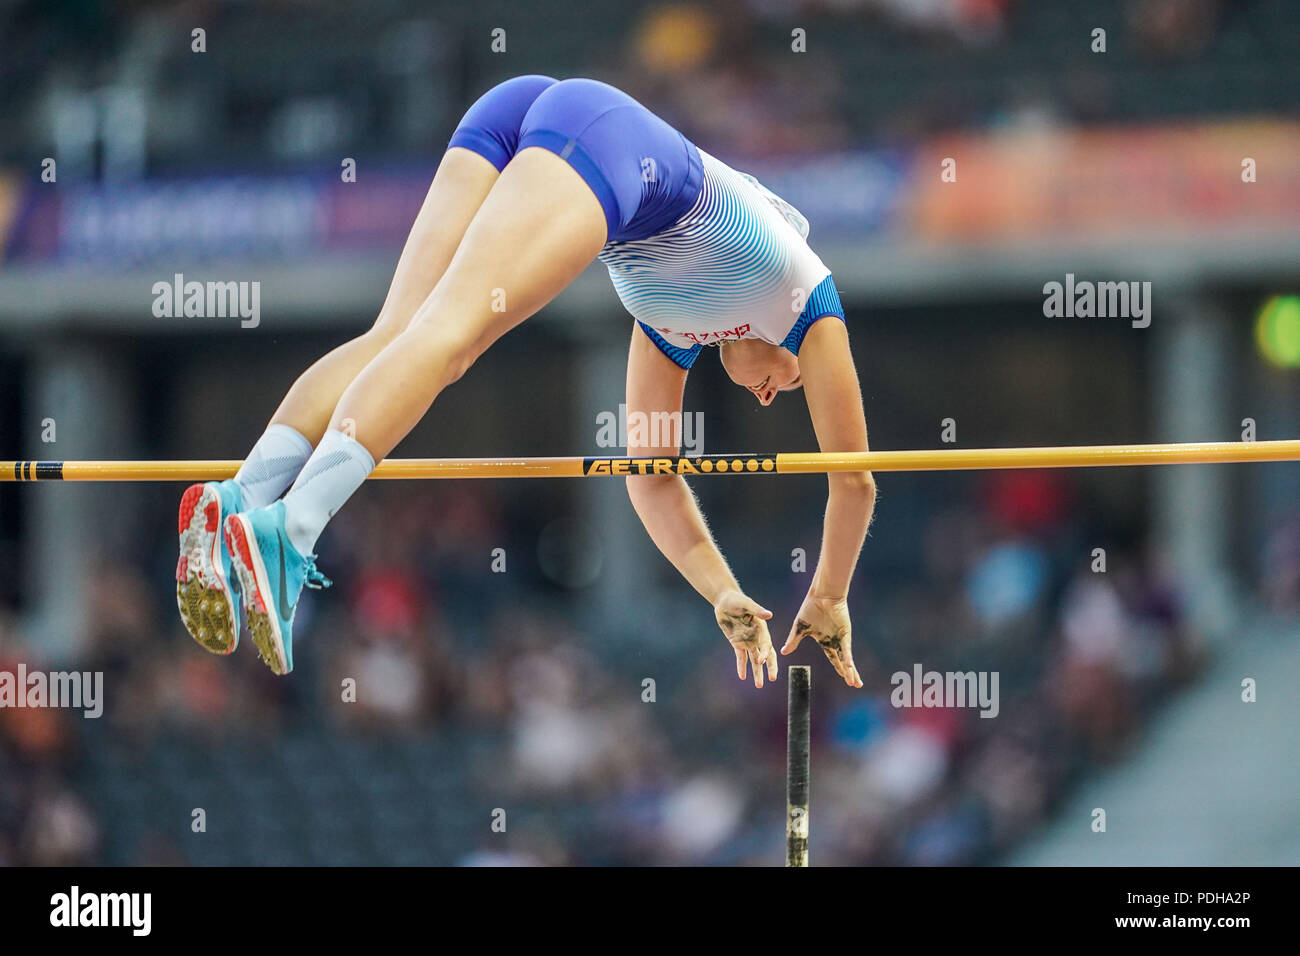 Berlin, Germany. August 9, 2018: Holly Bradshaw of Â Great Britain during pole vault final for women at the Olympic Stadium in Berlin at the European Athletics Championship. Ulrik Pedersen/CSM Credit: Cal Sport Media/Alamy Live News Stock Photo